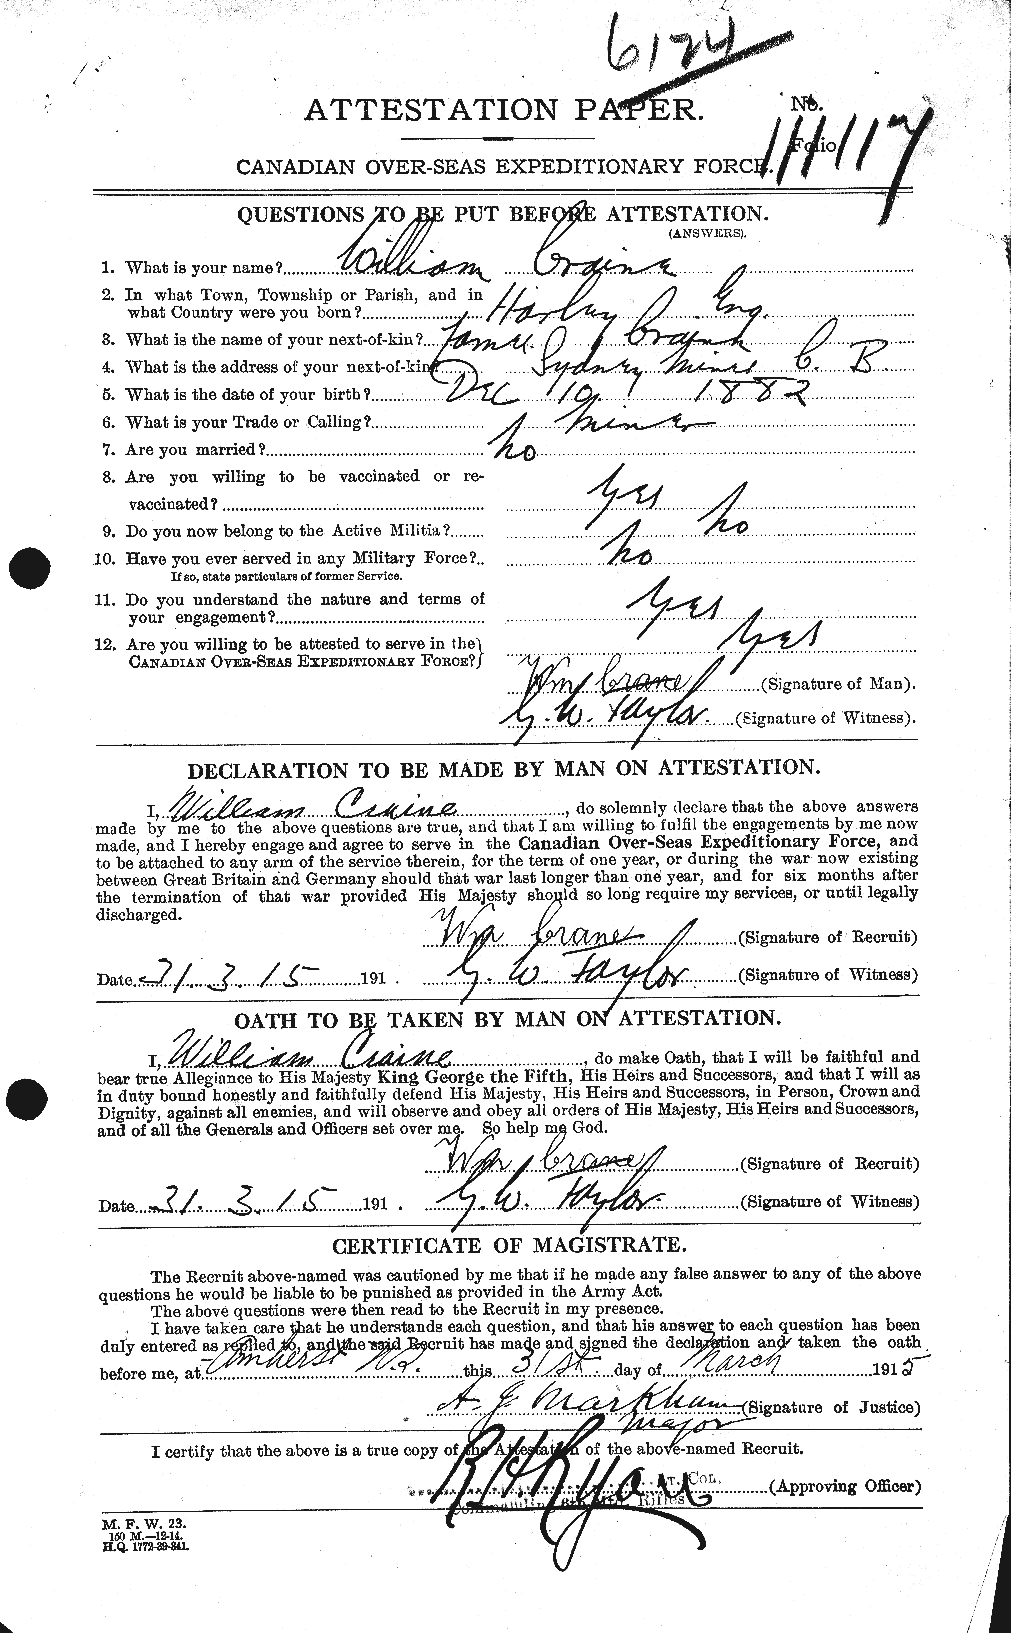 Personnel Records of the First World War - CEF 062307a